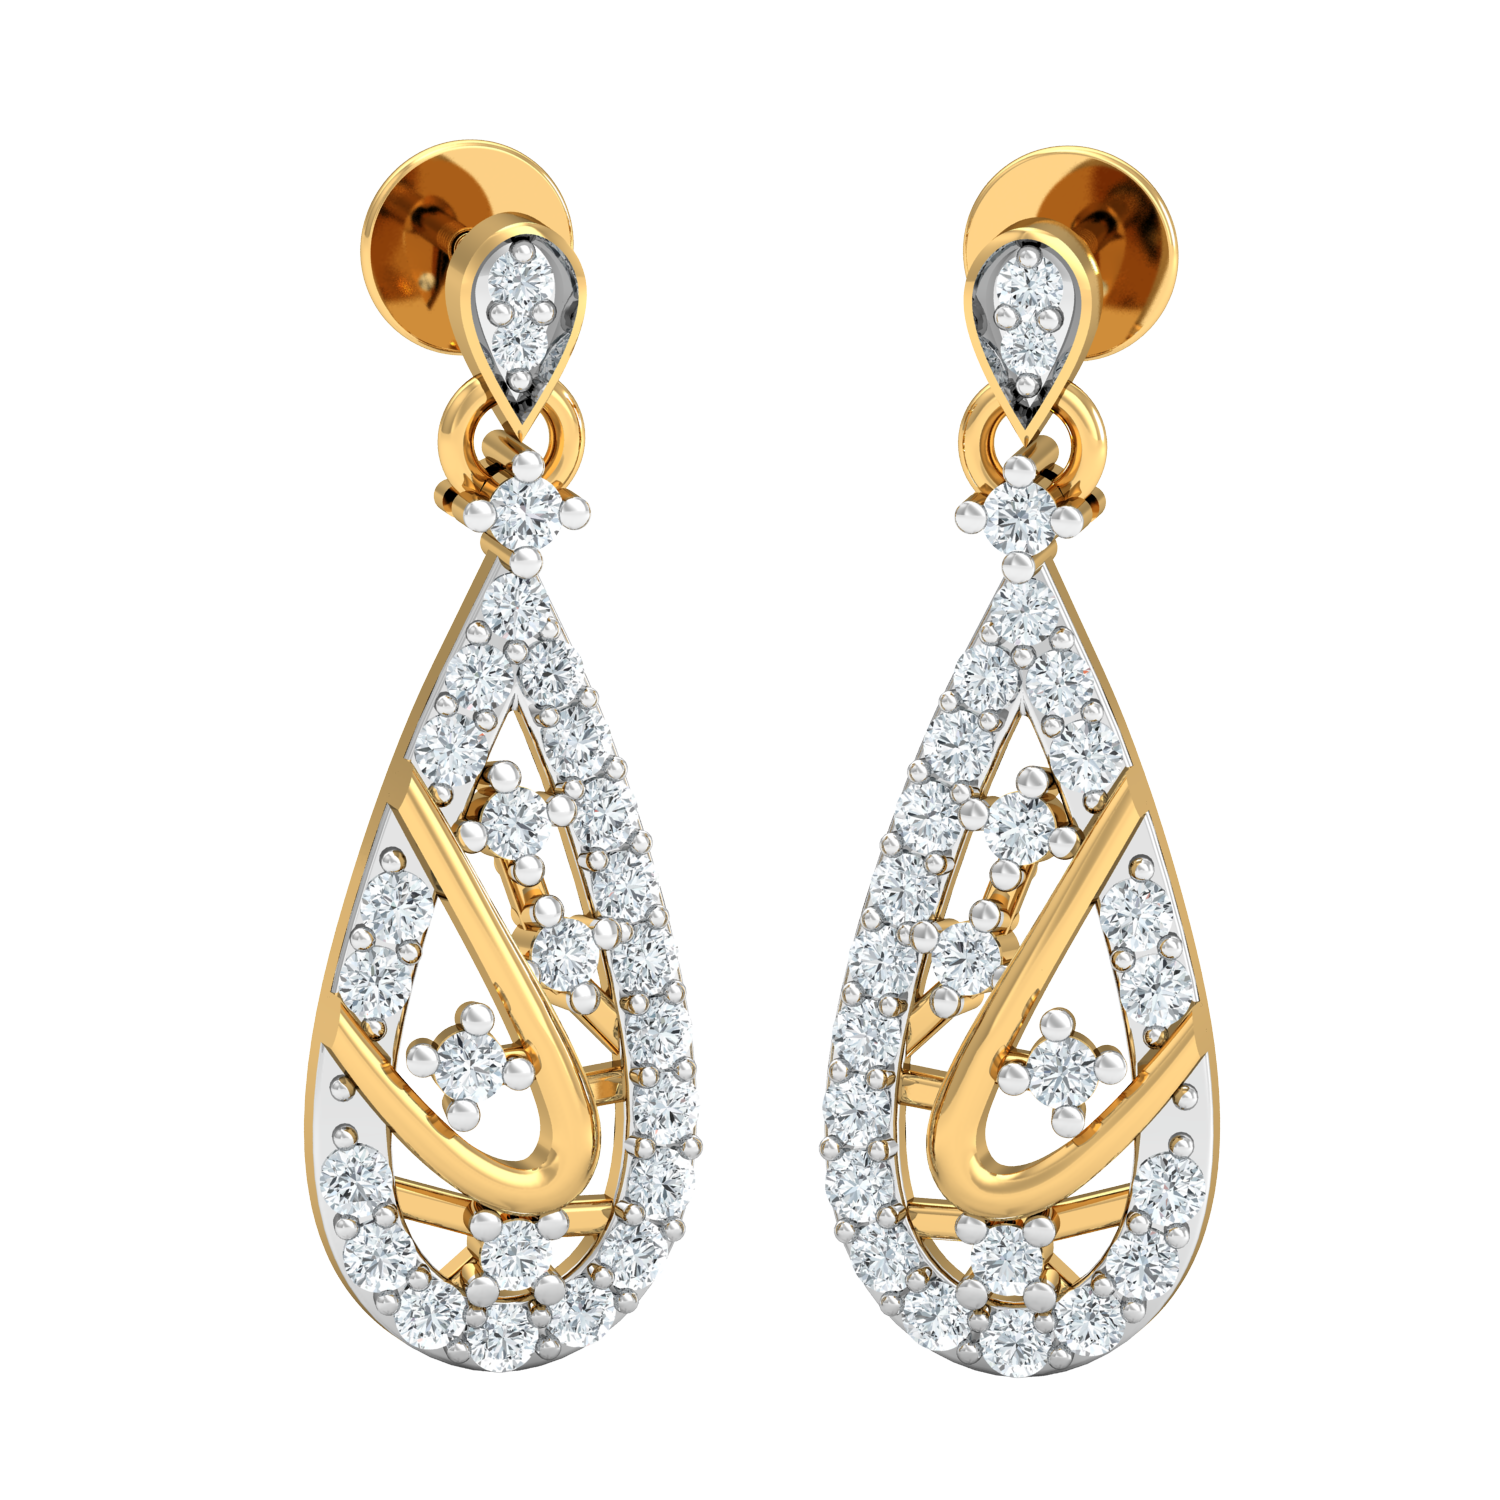 Diamond Earring PNG Image File - PNG All | PNG All